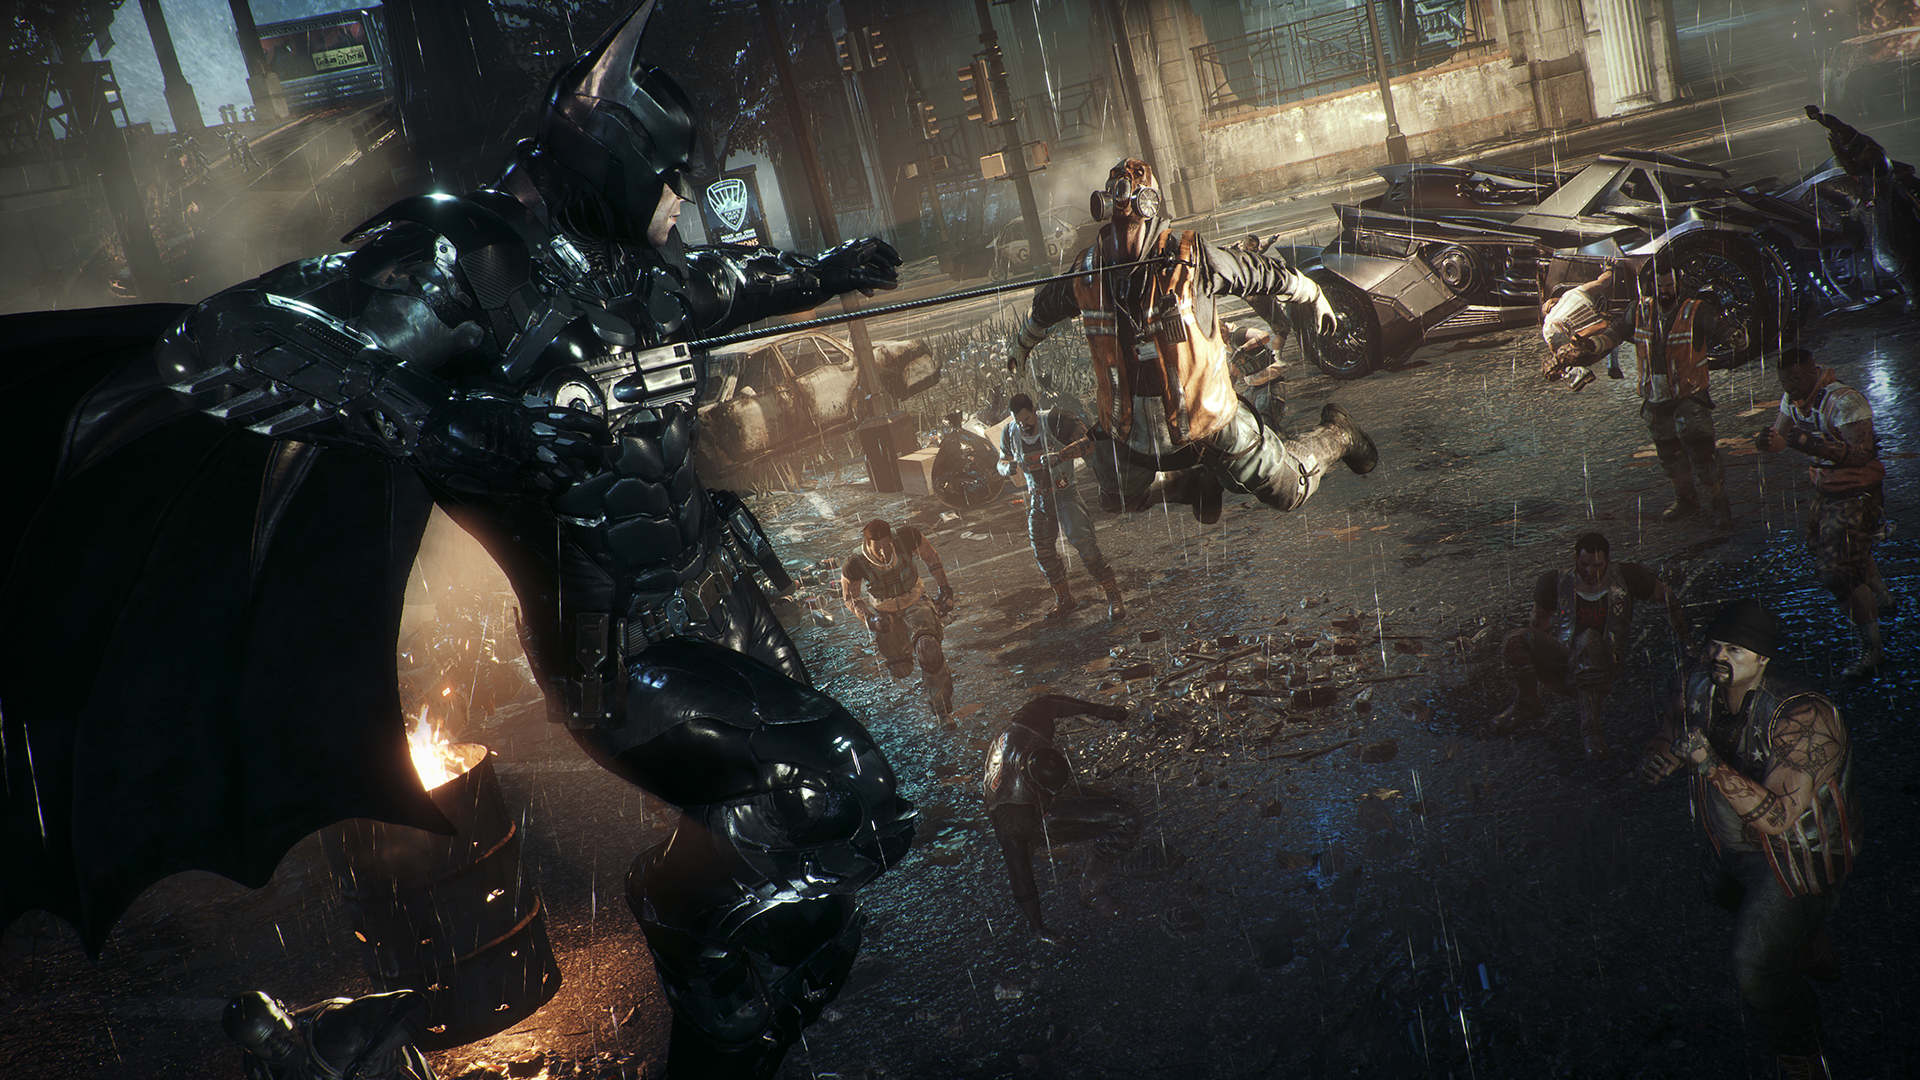 Batman Arkham Knight on PC has been removed from sale | GamesRadar+